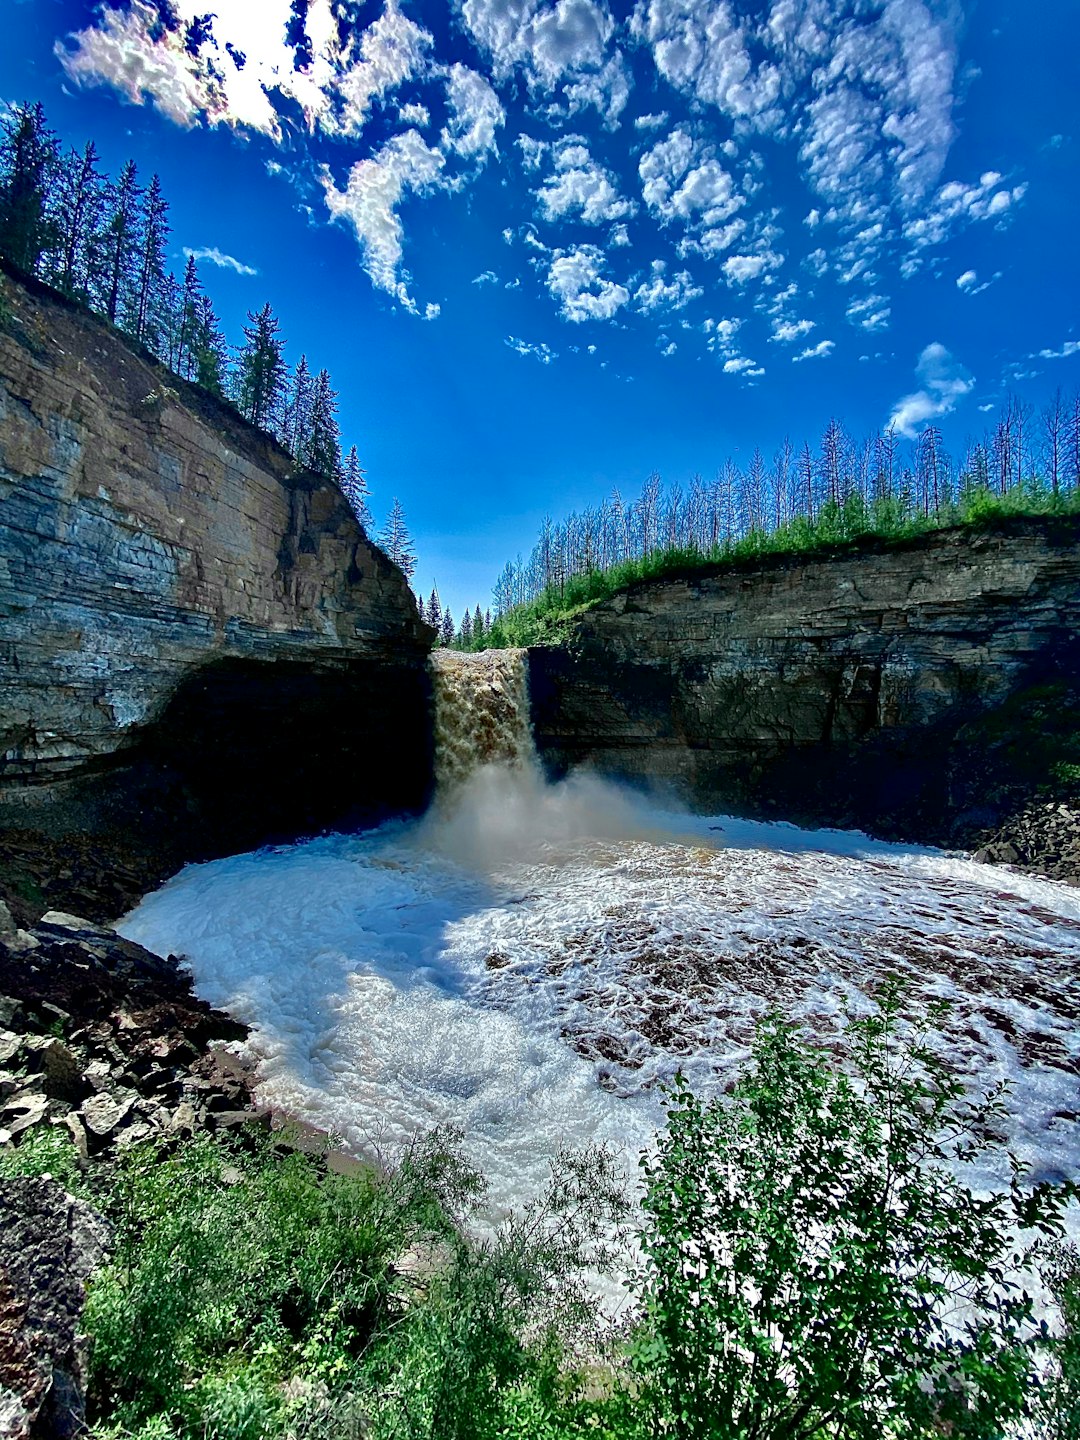 Travel Tips and Stories of Wood Buffalo National Park in Canada